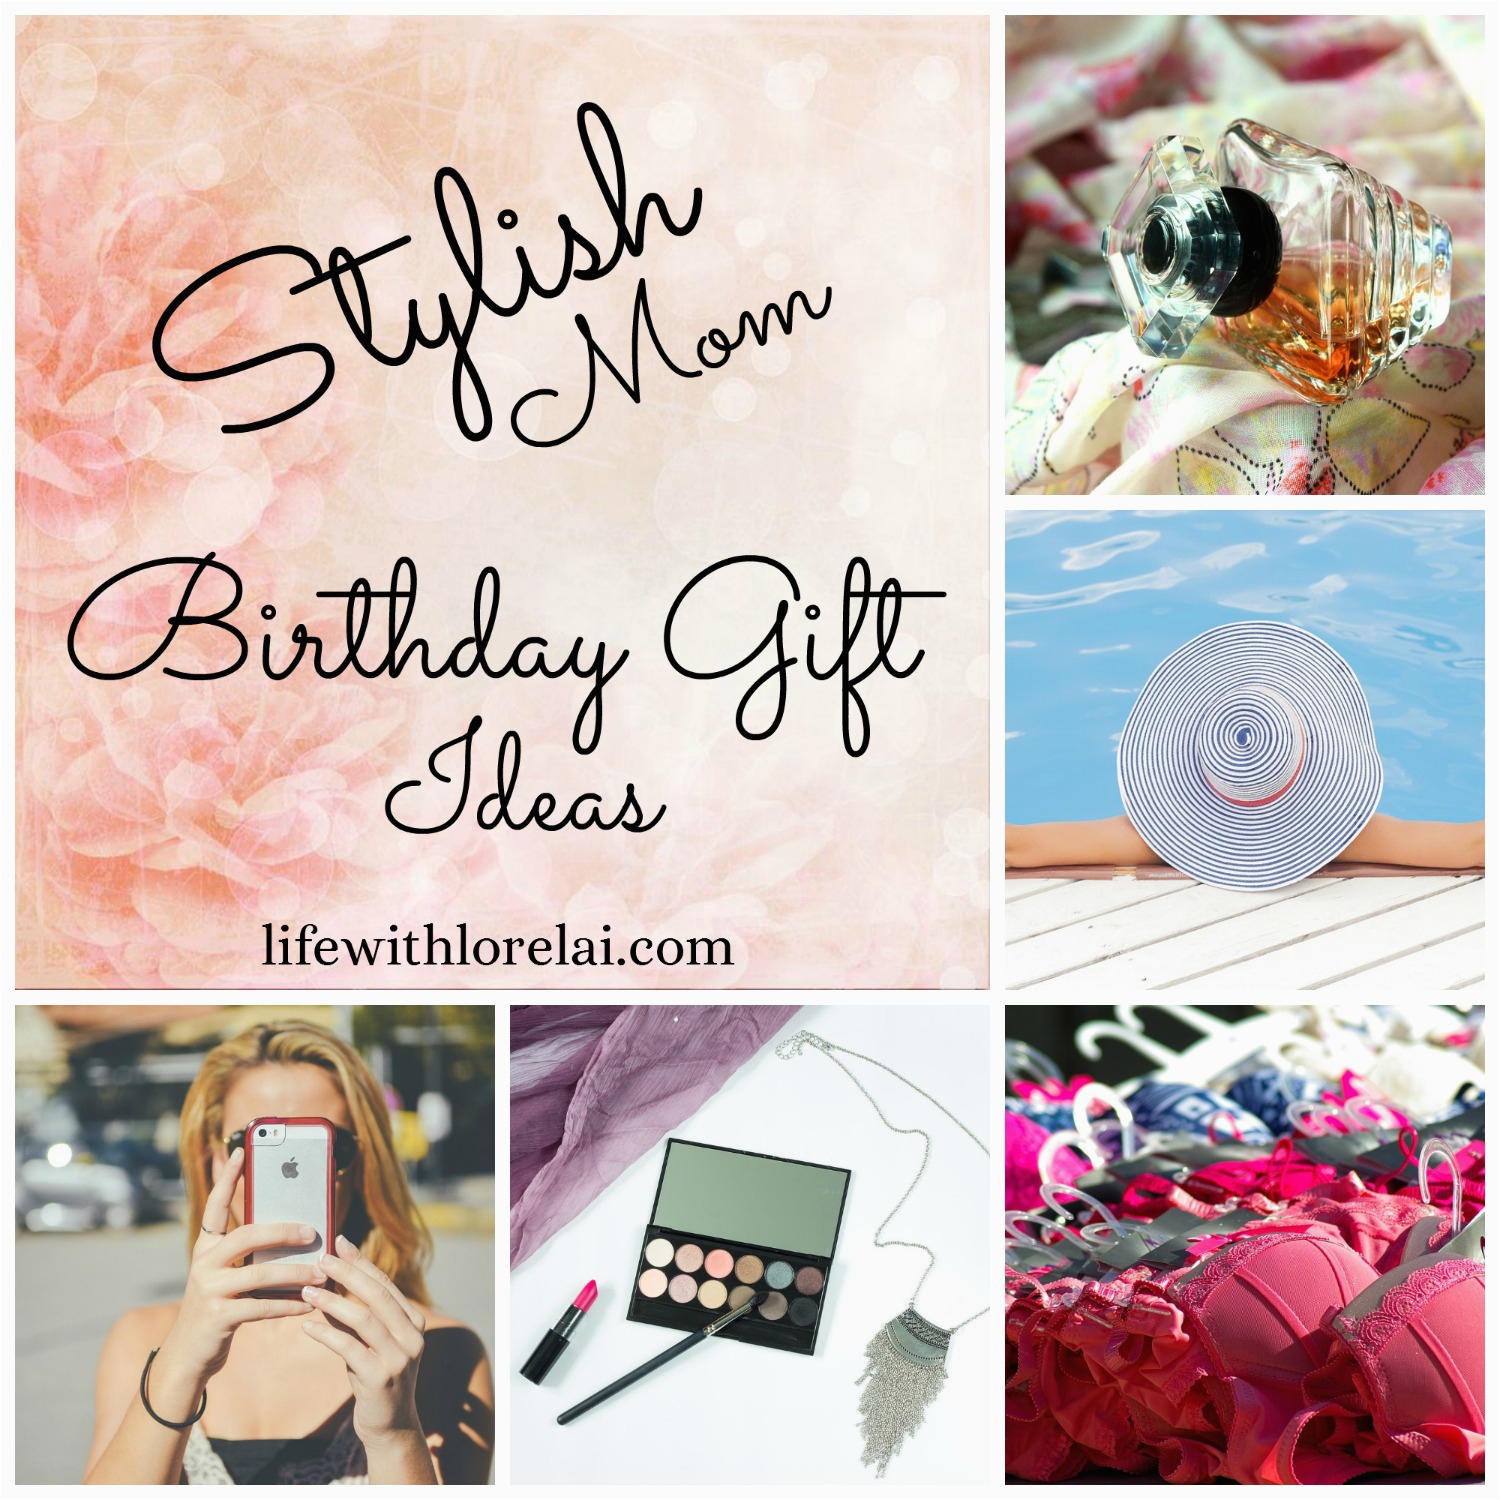 birthday gift ideas for the stylish mom life with lorelai